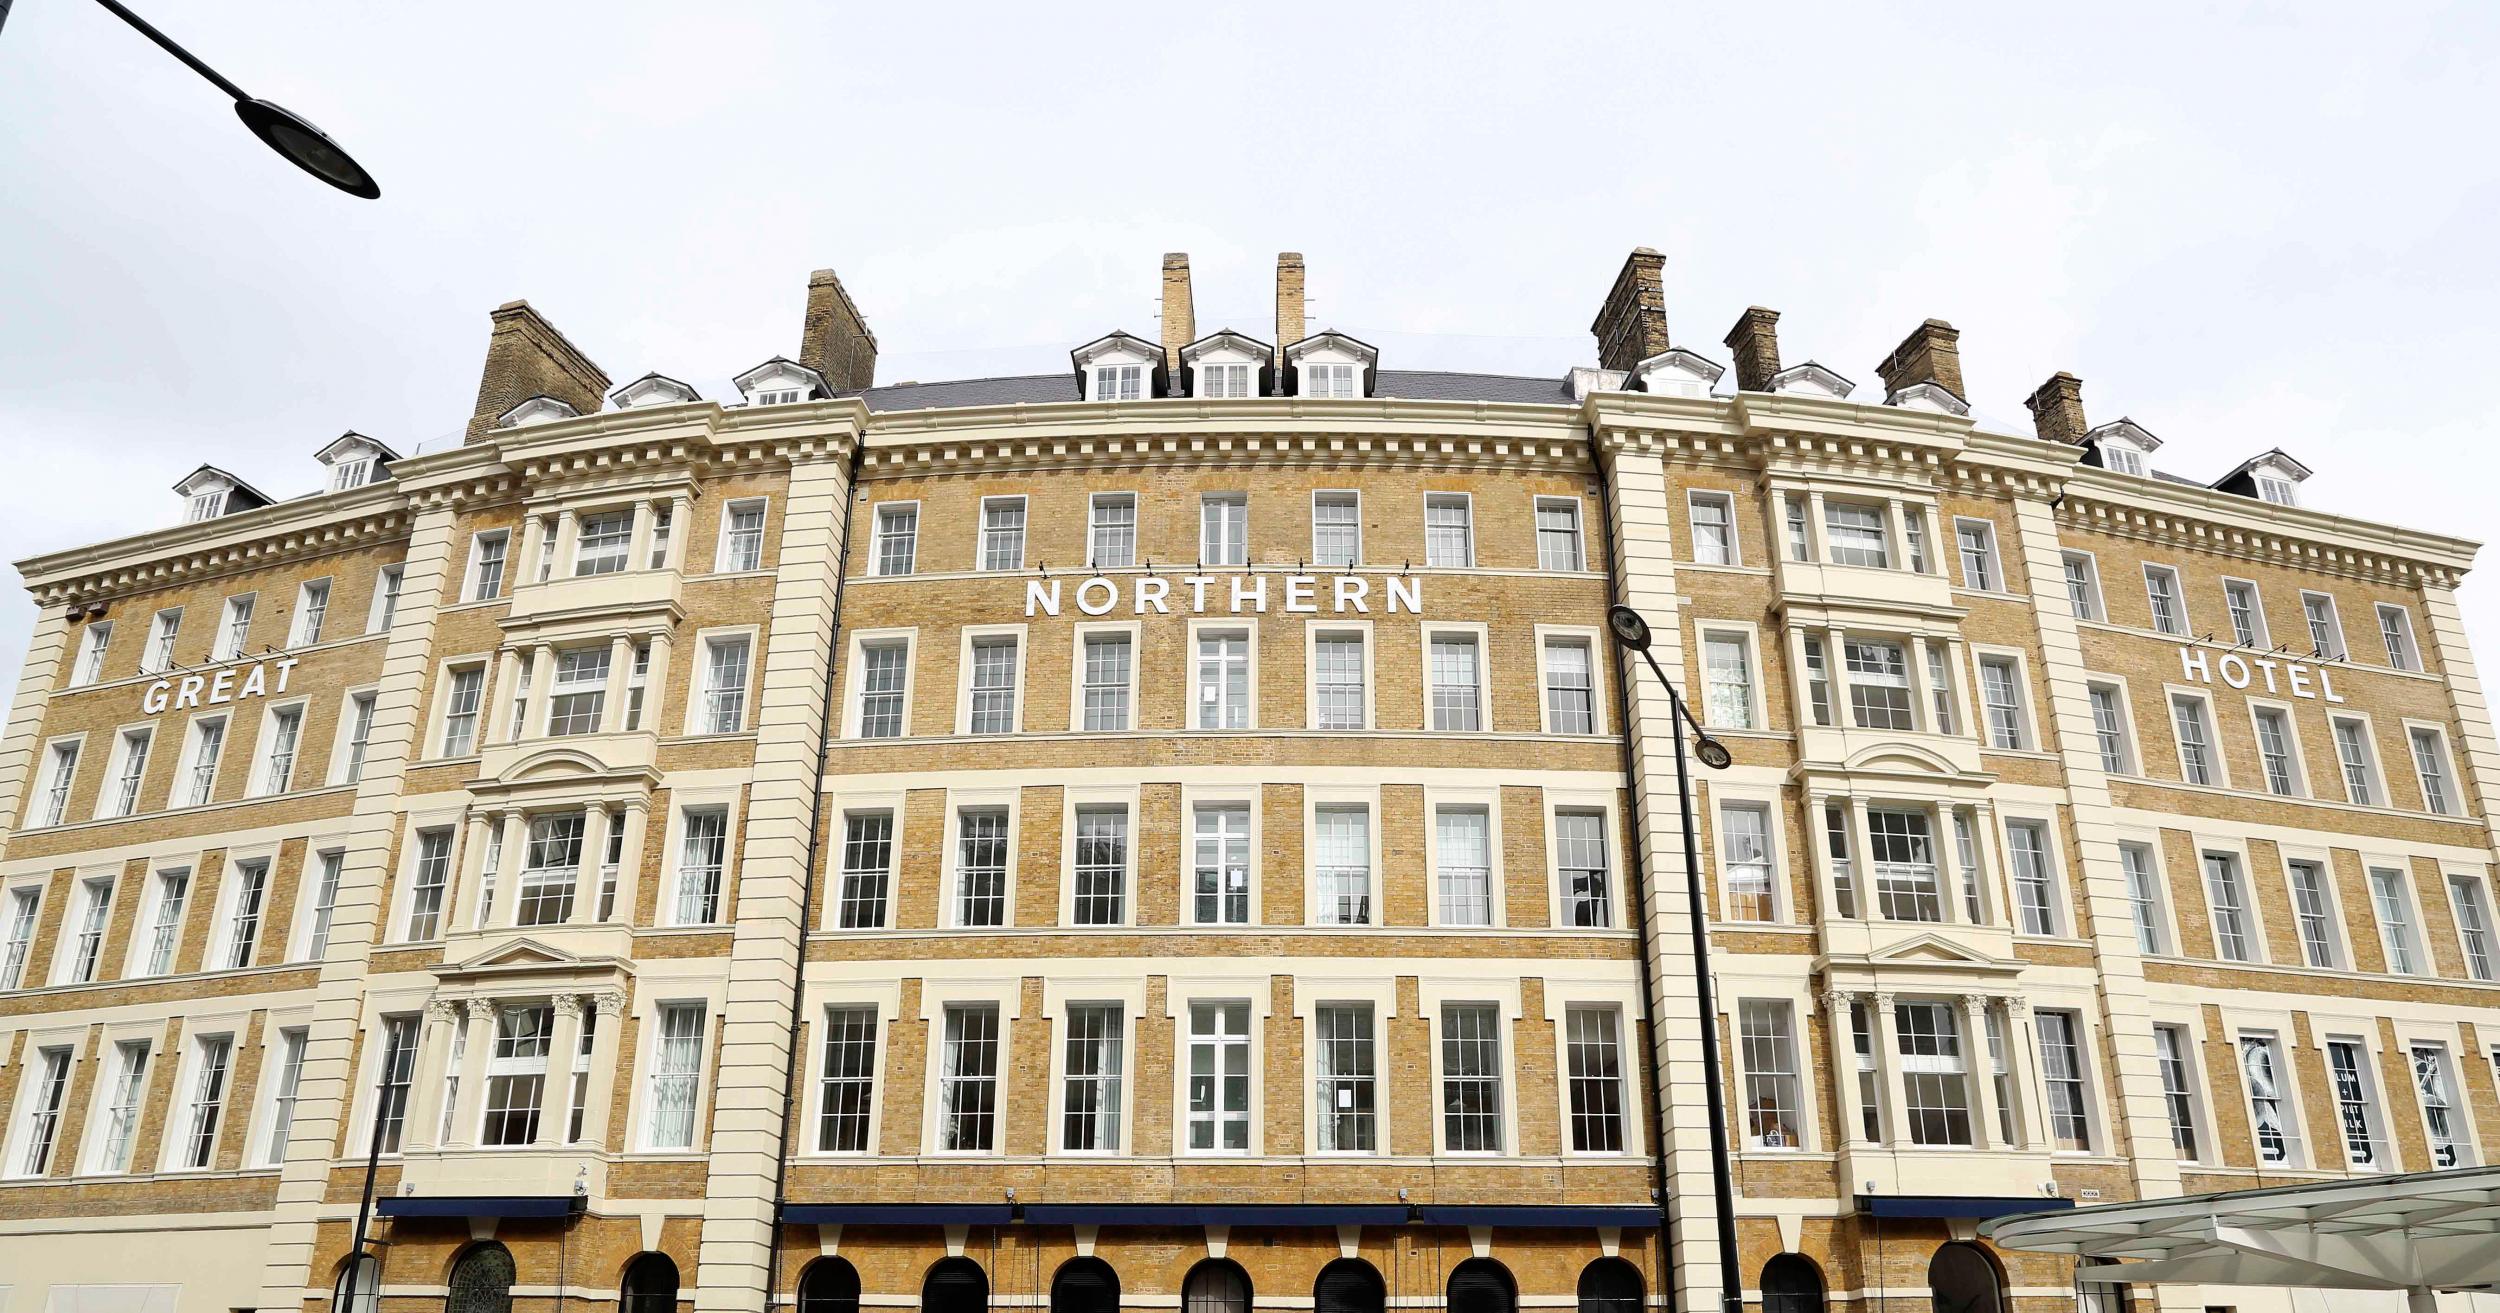 The Great Northern Hotel is one of London's most iconic railway hotels